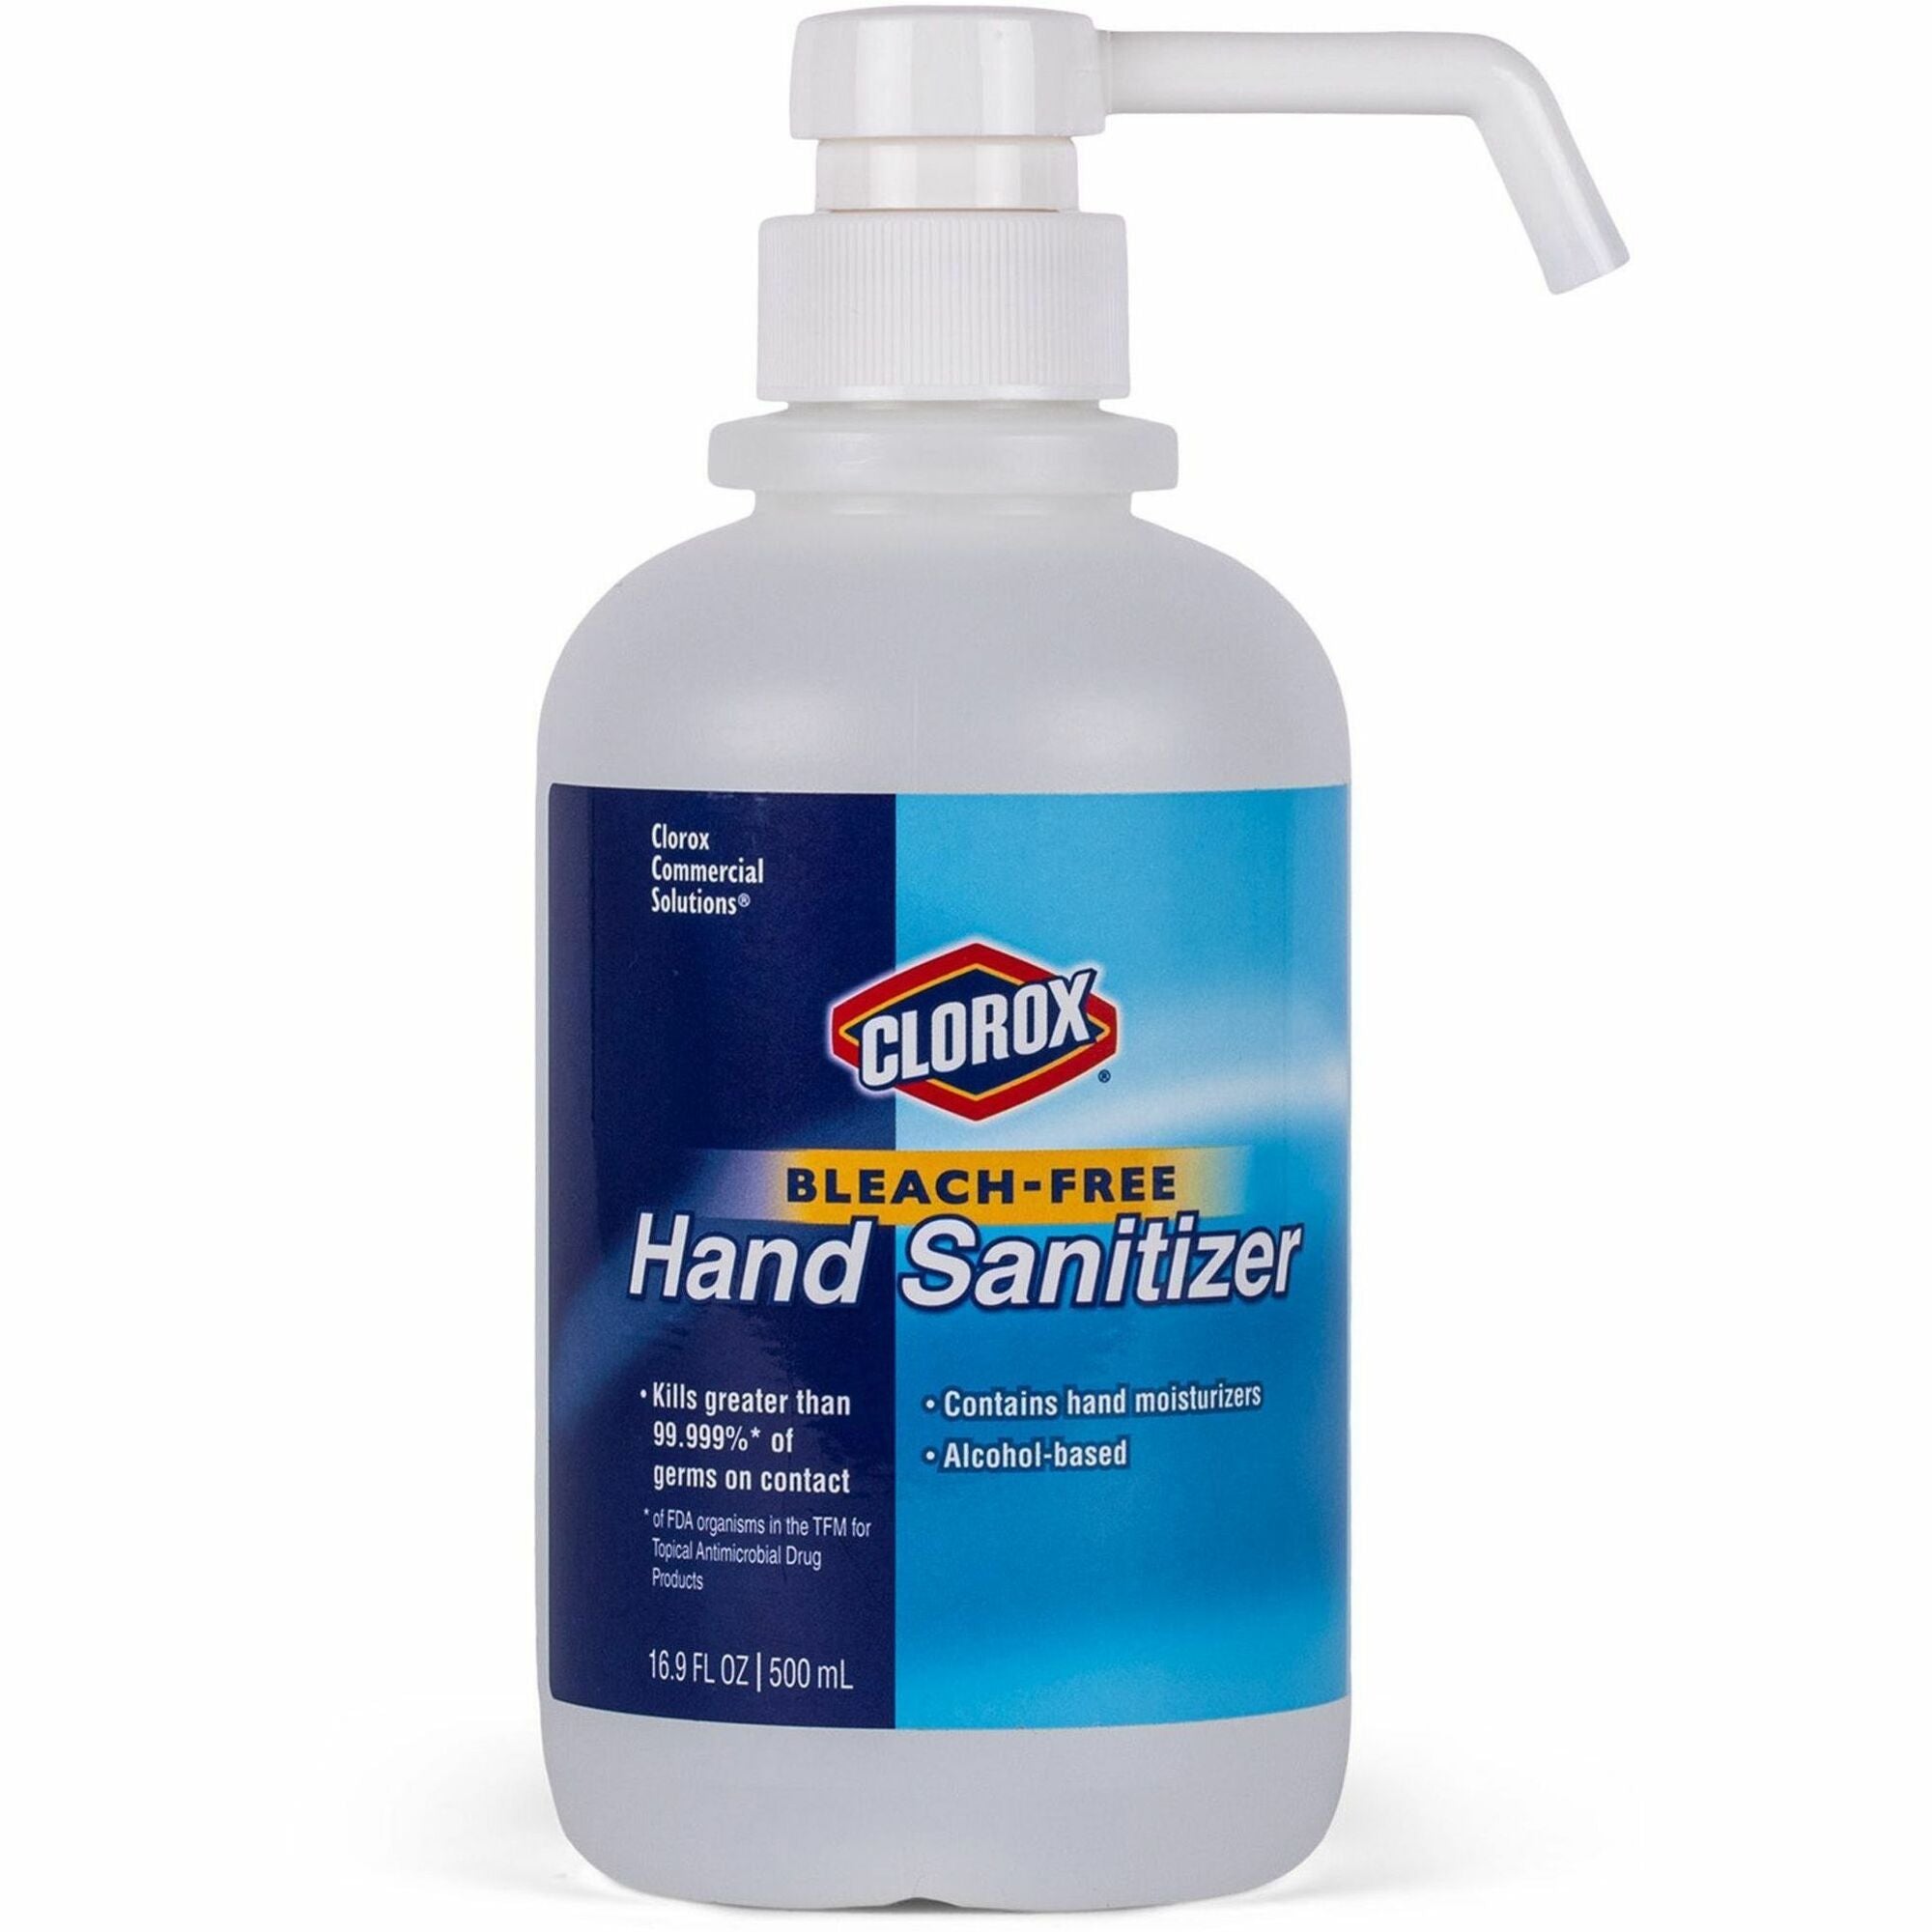 clorox-commercial-solutions-hand-sanitizer-169-fl-oz-4998-ml-pump-bottle-dispenser-kill-germs-hand-moisturizing-clear-bleach-free-non-sticky-non-greasy-432-bundle_clo02176bd - 1